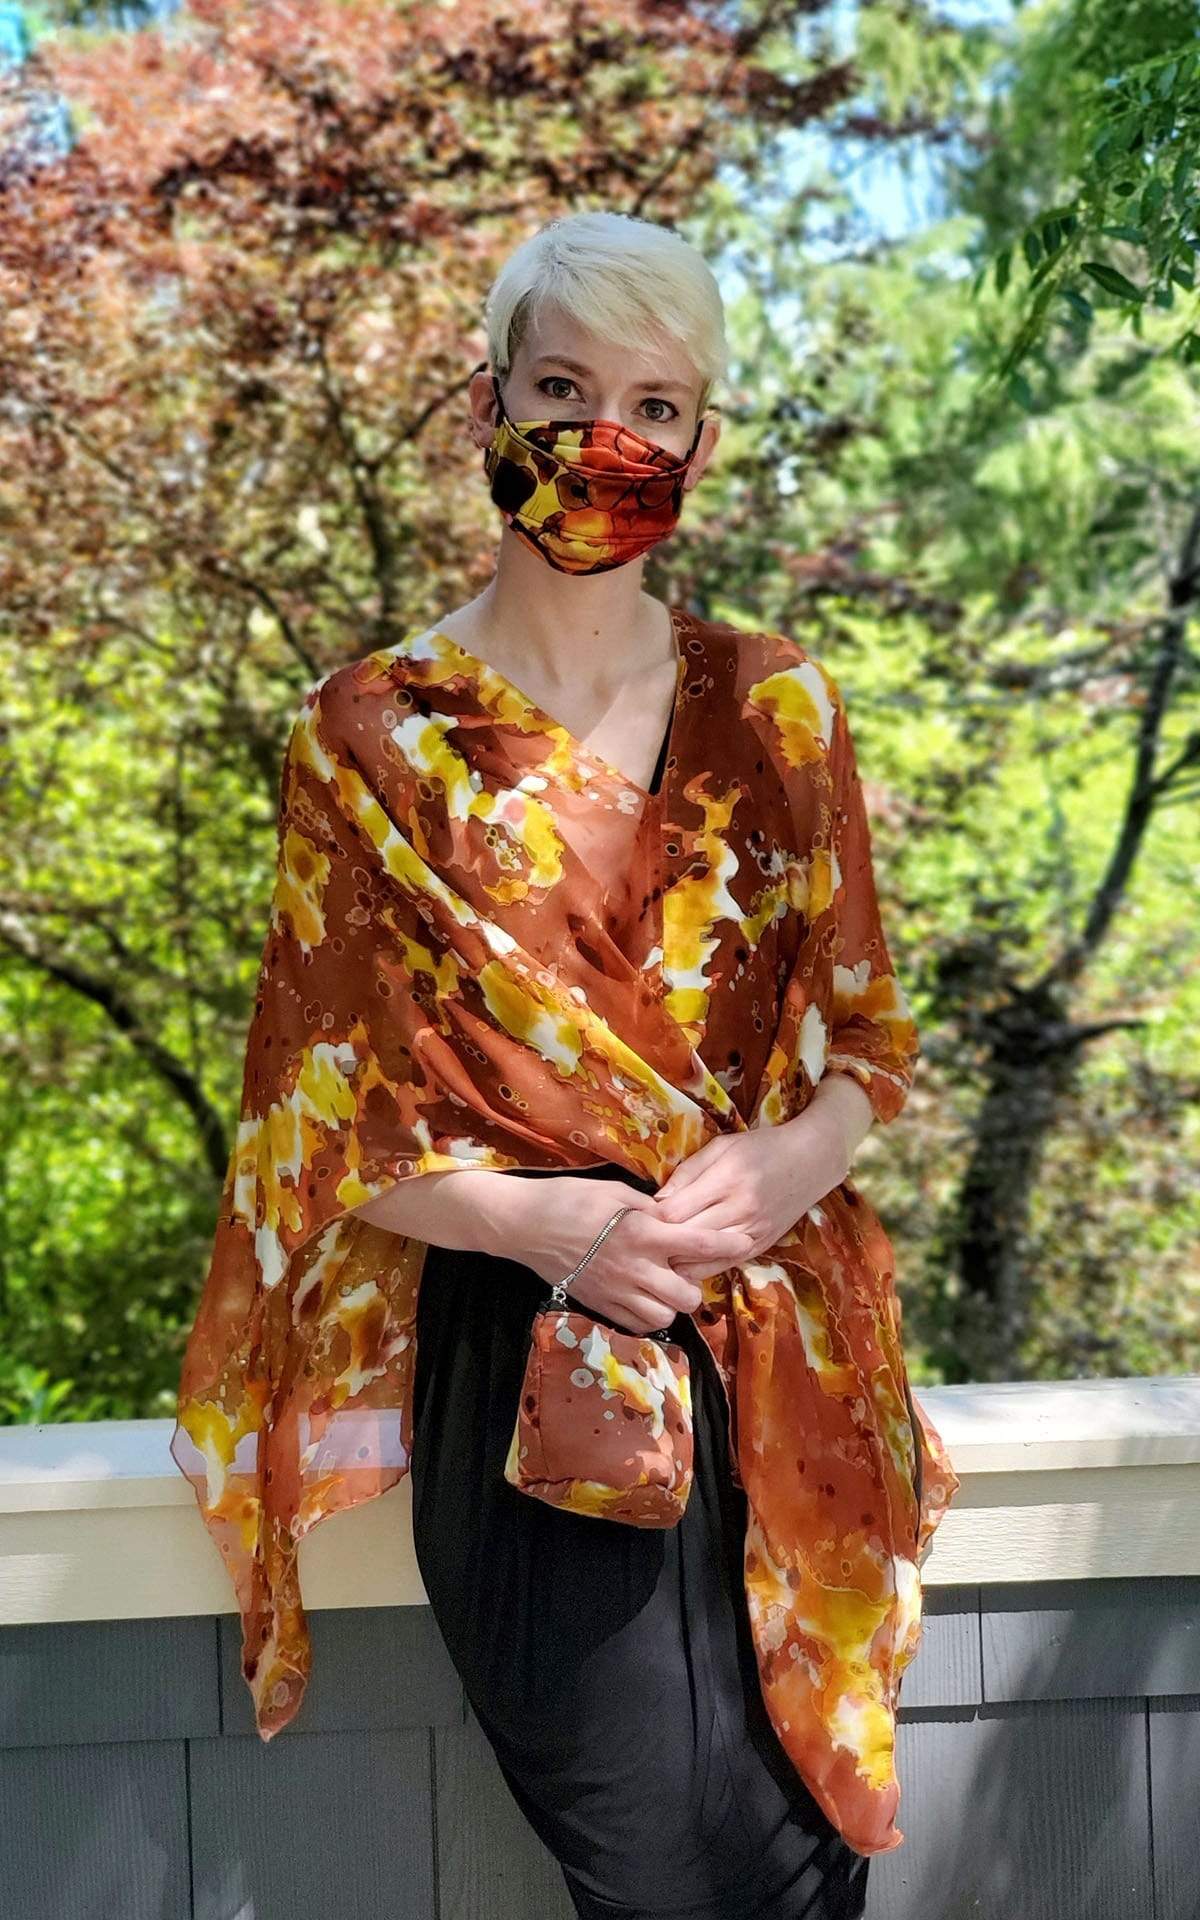 Women&#39;s Box Style Face Mask in Carnival Fiesta Silk with Poncho and Ibiza Bag | Handmade in Seattle WA | Pandemonium Millinery